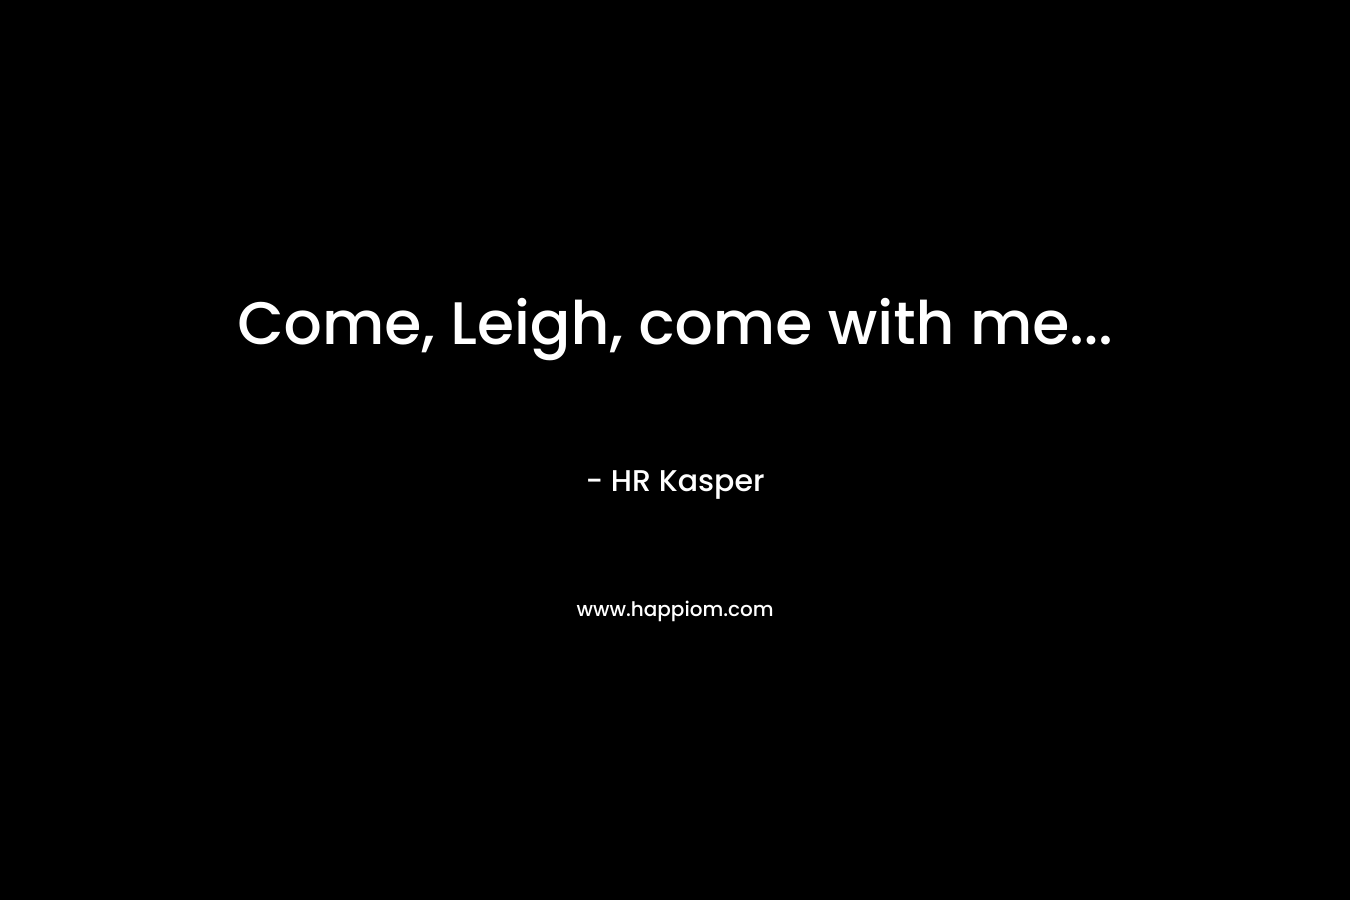 Come, Leigh, come with me...